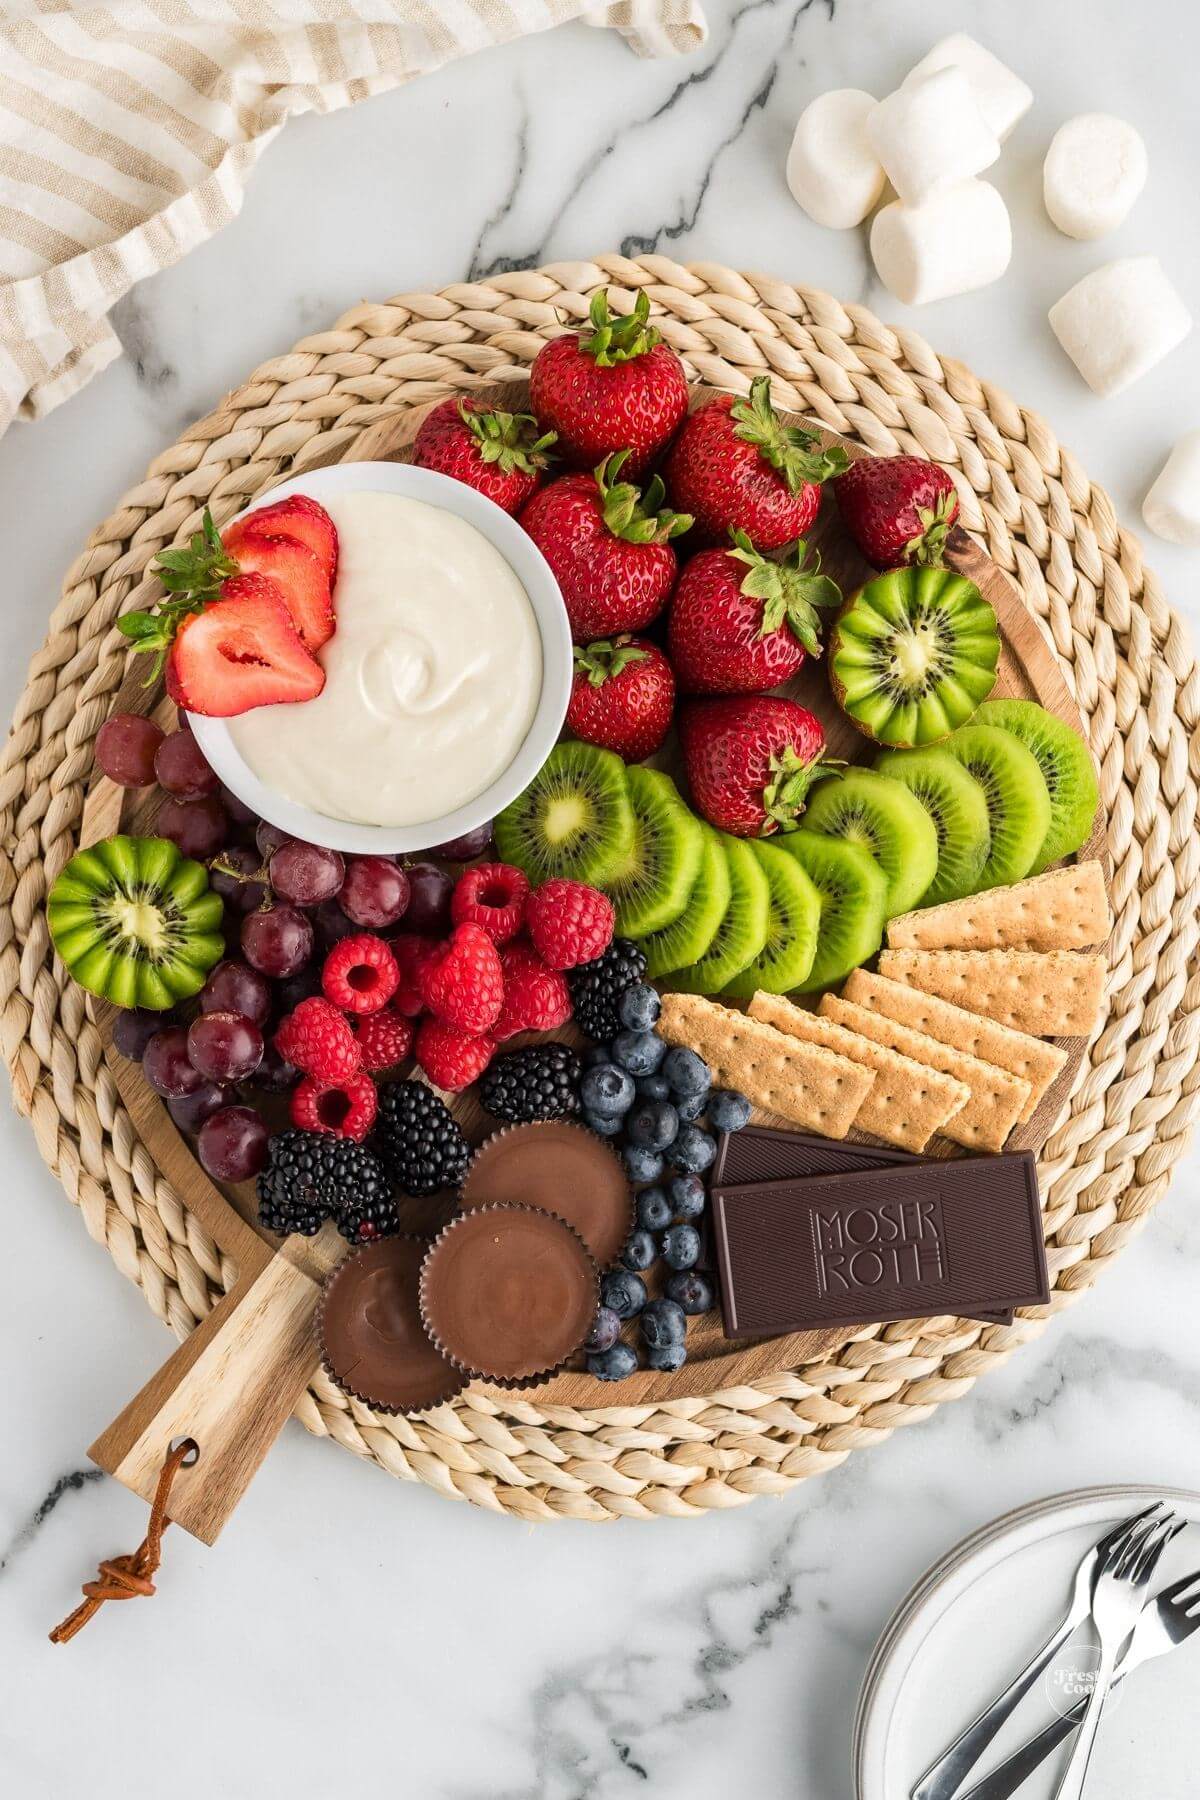 Platter with fresh fruits, crackers and chocolate surround a bowl of marshmallow fruit dip.